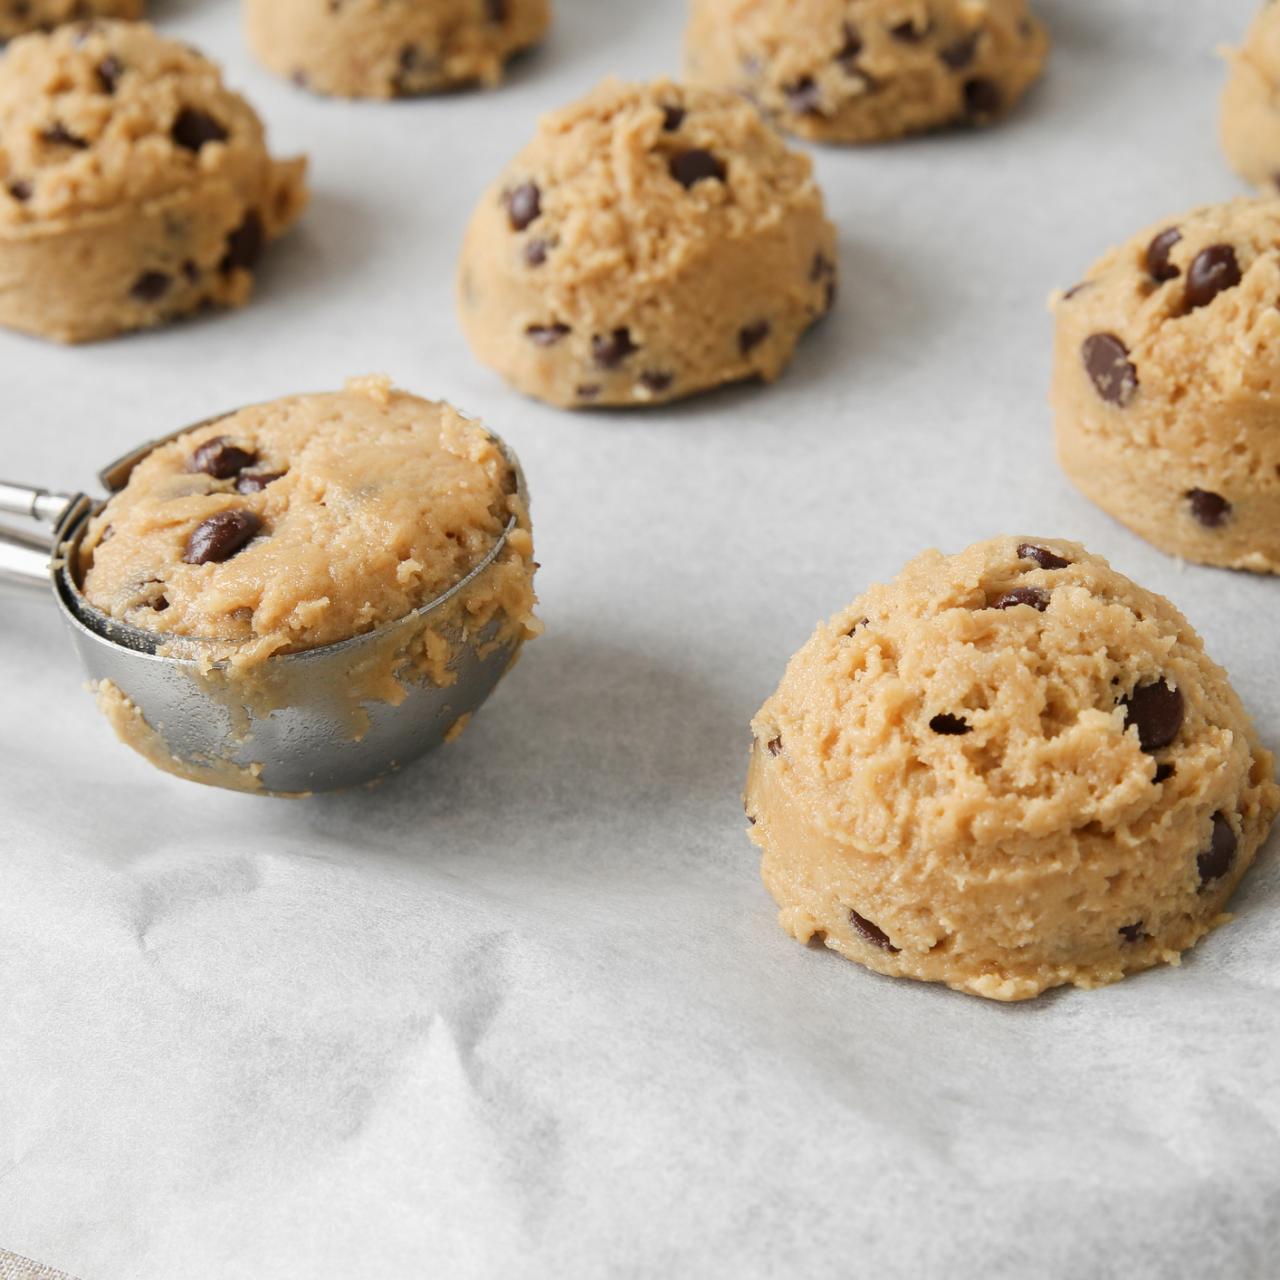 https://food.fnr.sndimg.com/content/dam/images/food/fullset/2020/04/15/01/FN_chocolate-chip-cookie-dough-scoops-getty-images-stock_s6x4.jpg.rend.hgtvcom.1280.1280.suffix/1586979485630.jpeg